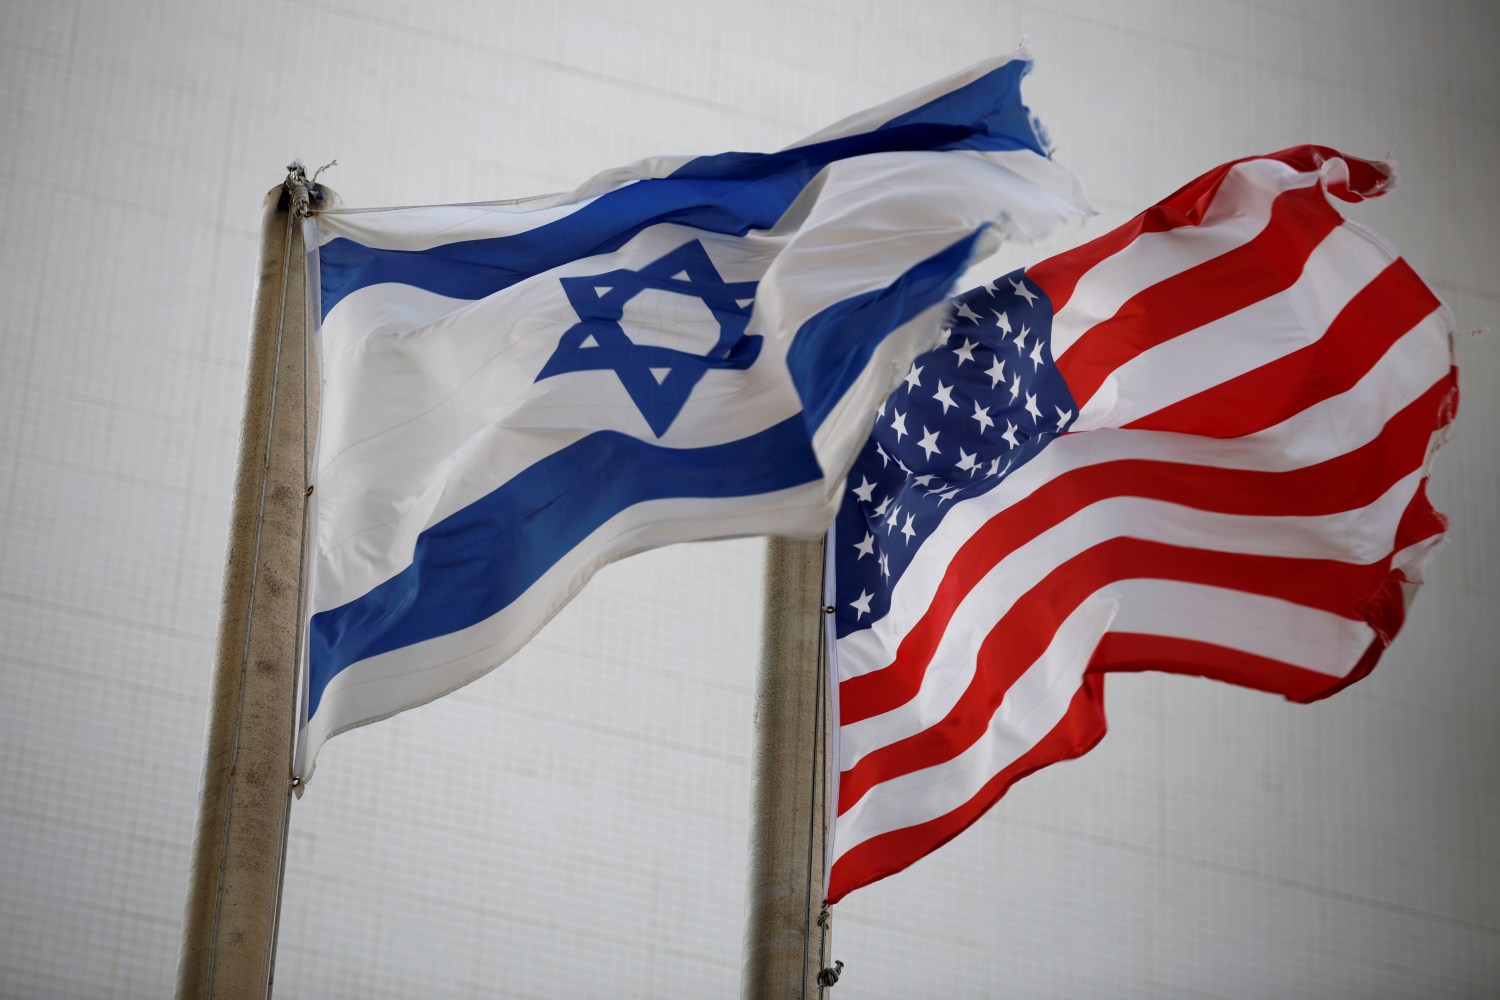 The American and the Israeli national flags can be seen outside the U.S Embassy in Tel Aviv, Israel December 5, 2017. REUTERS/Amir Cohen - RC12C5C0CBF0